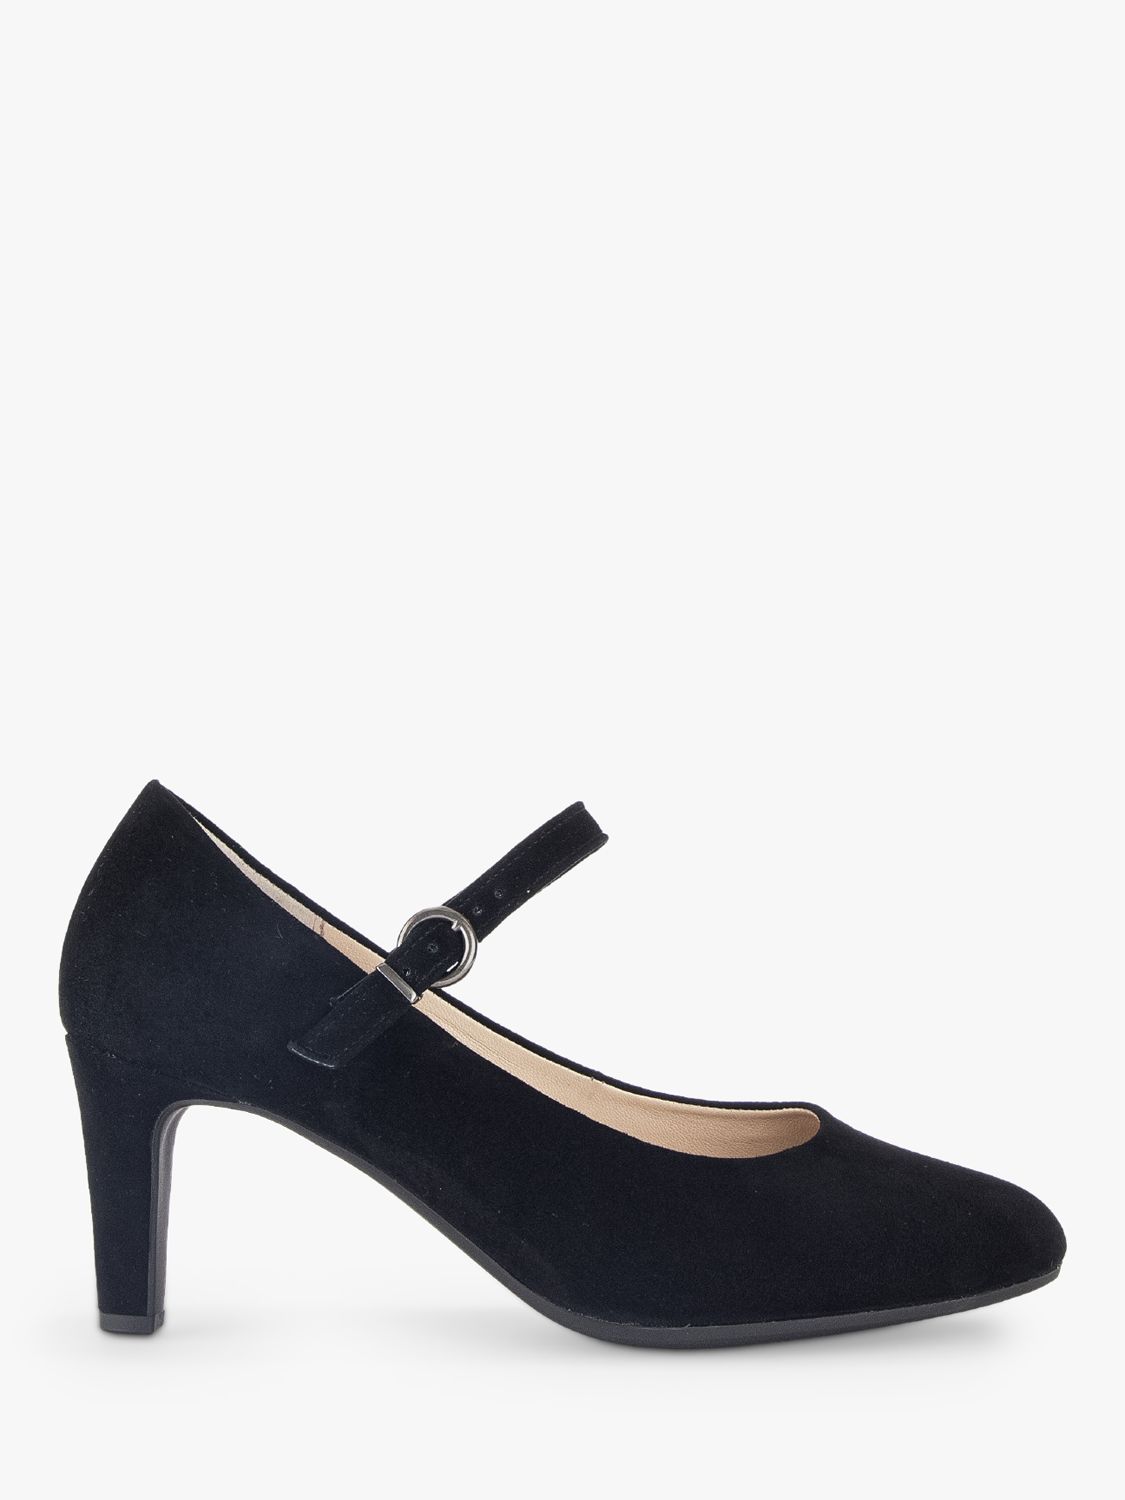 Gabor Emulate Suede Buckle Mary Jane Shoes, Black at John Lewis & Partners